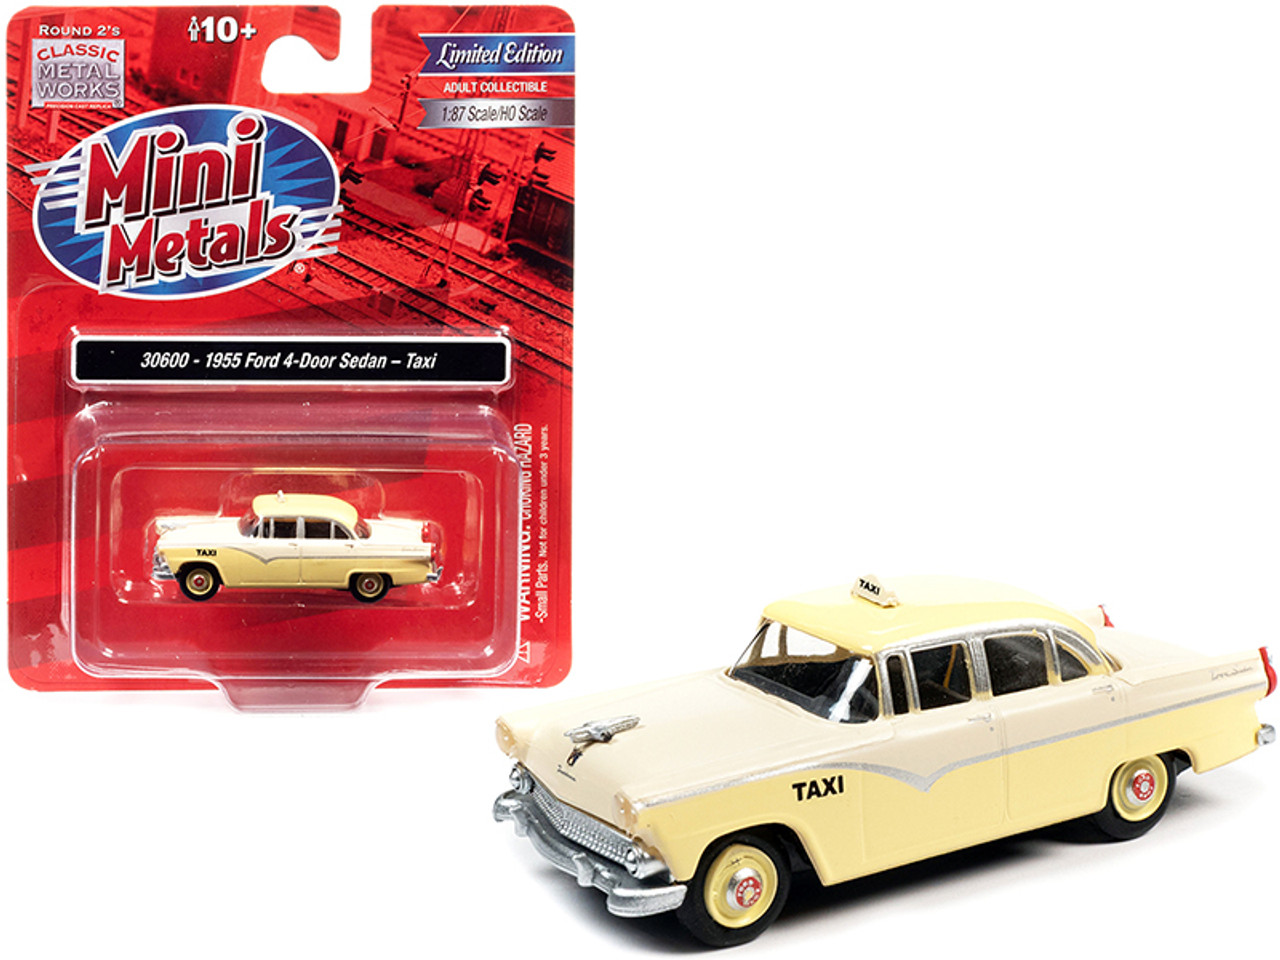 1955 Ford 4-Door Sedan "Taxi" Yellow and Cream 1/87 (HO) Scale Model Car by Classic Metal Works